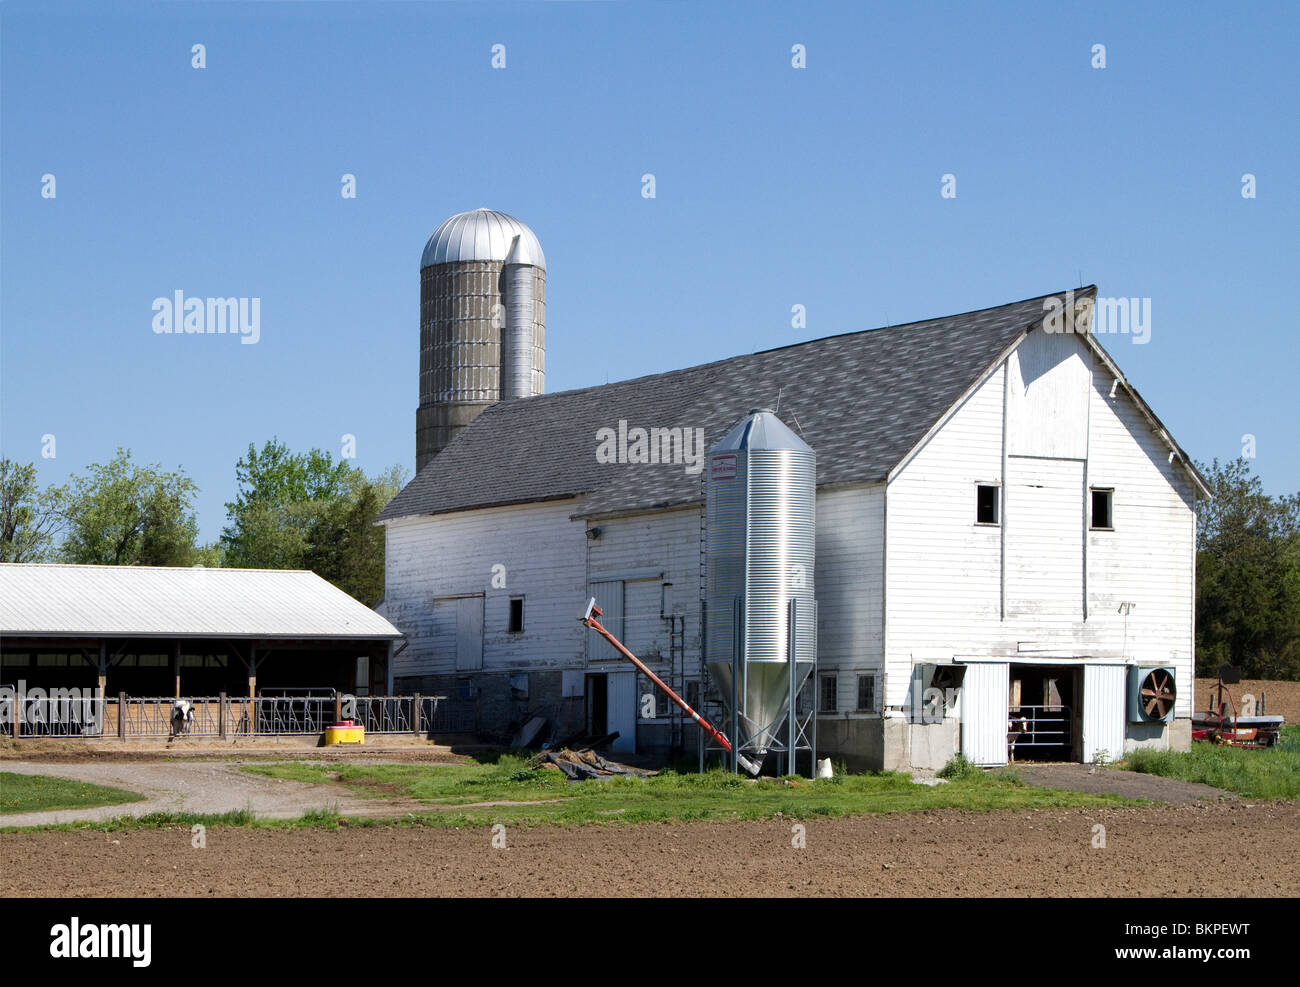 A working dairy farm with outdoor trough. A silo and white barn and a one lone cow at the trough. Stock Photo